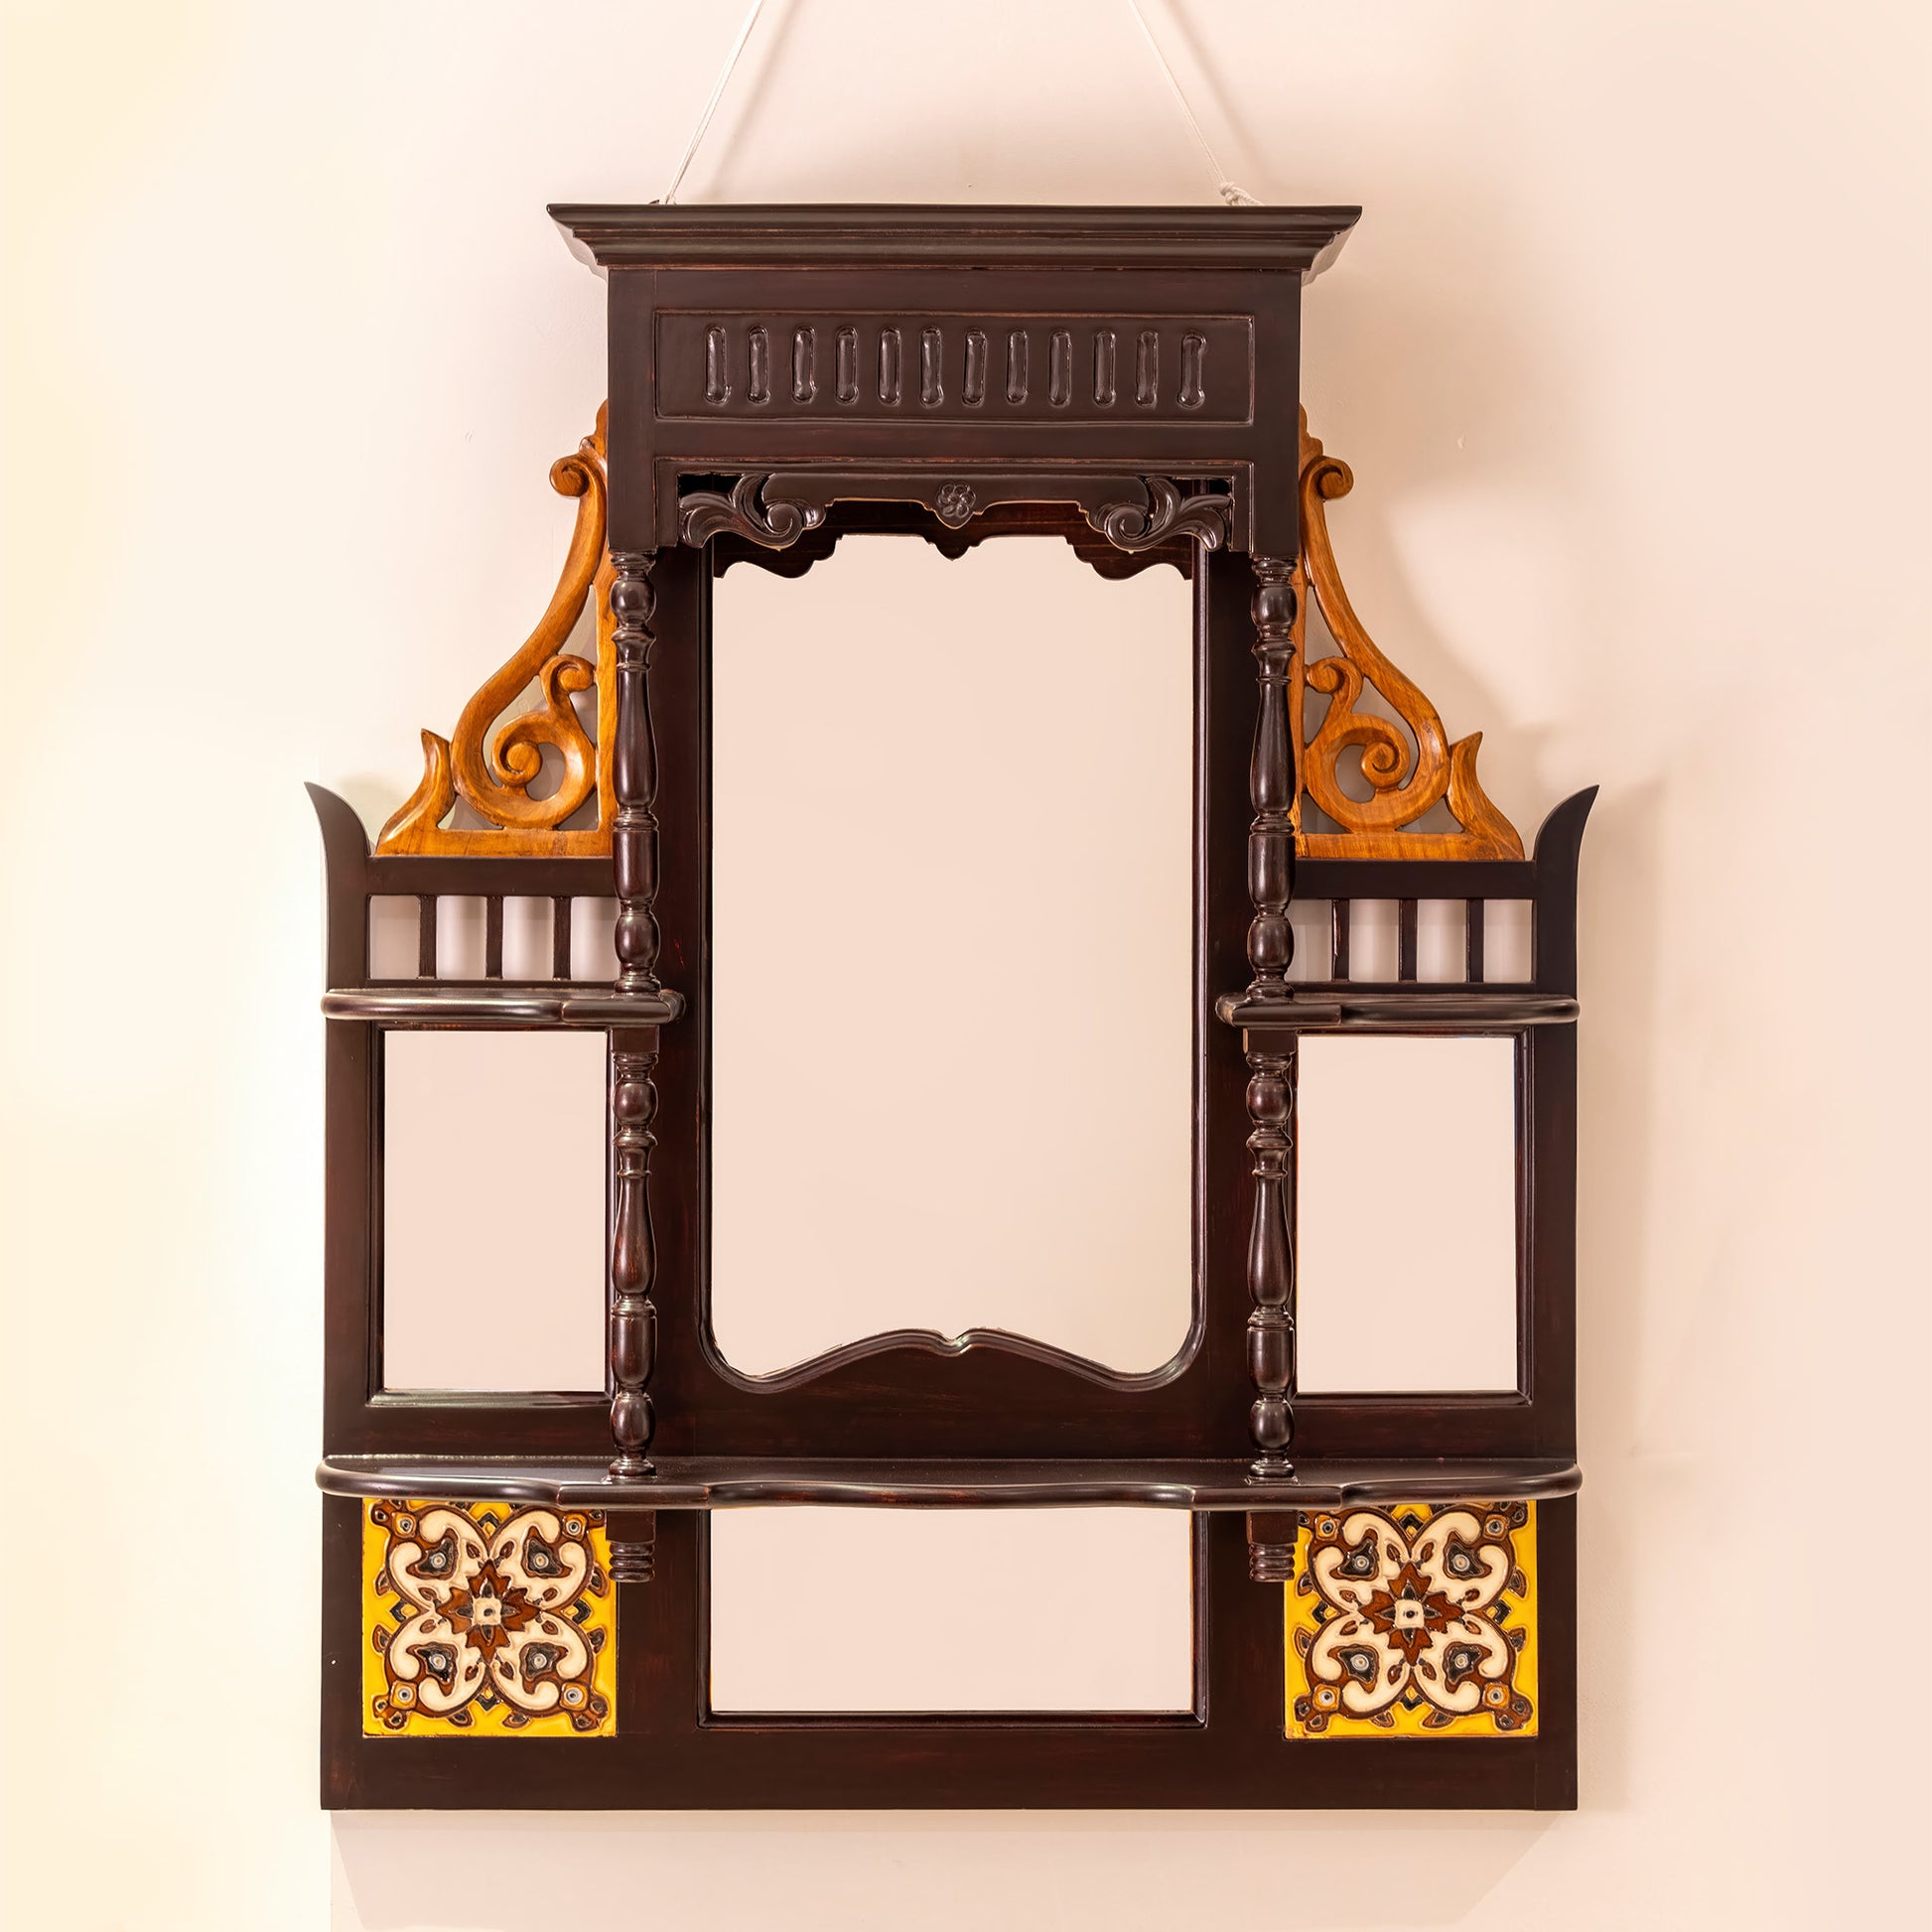 Wooden Mirror With Ceramic Plates